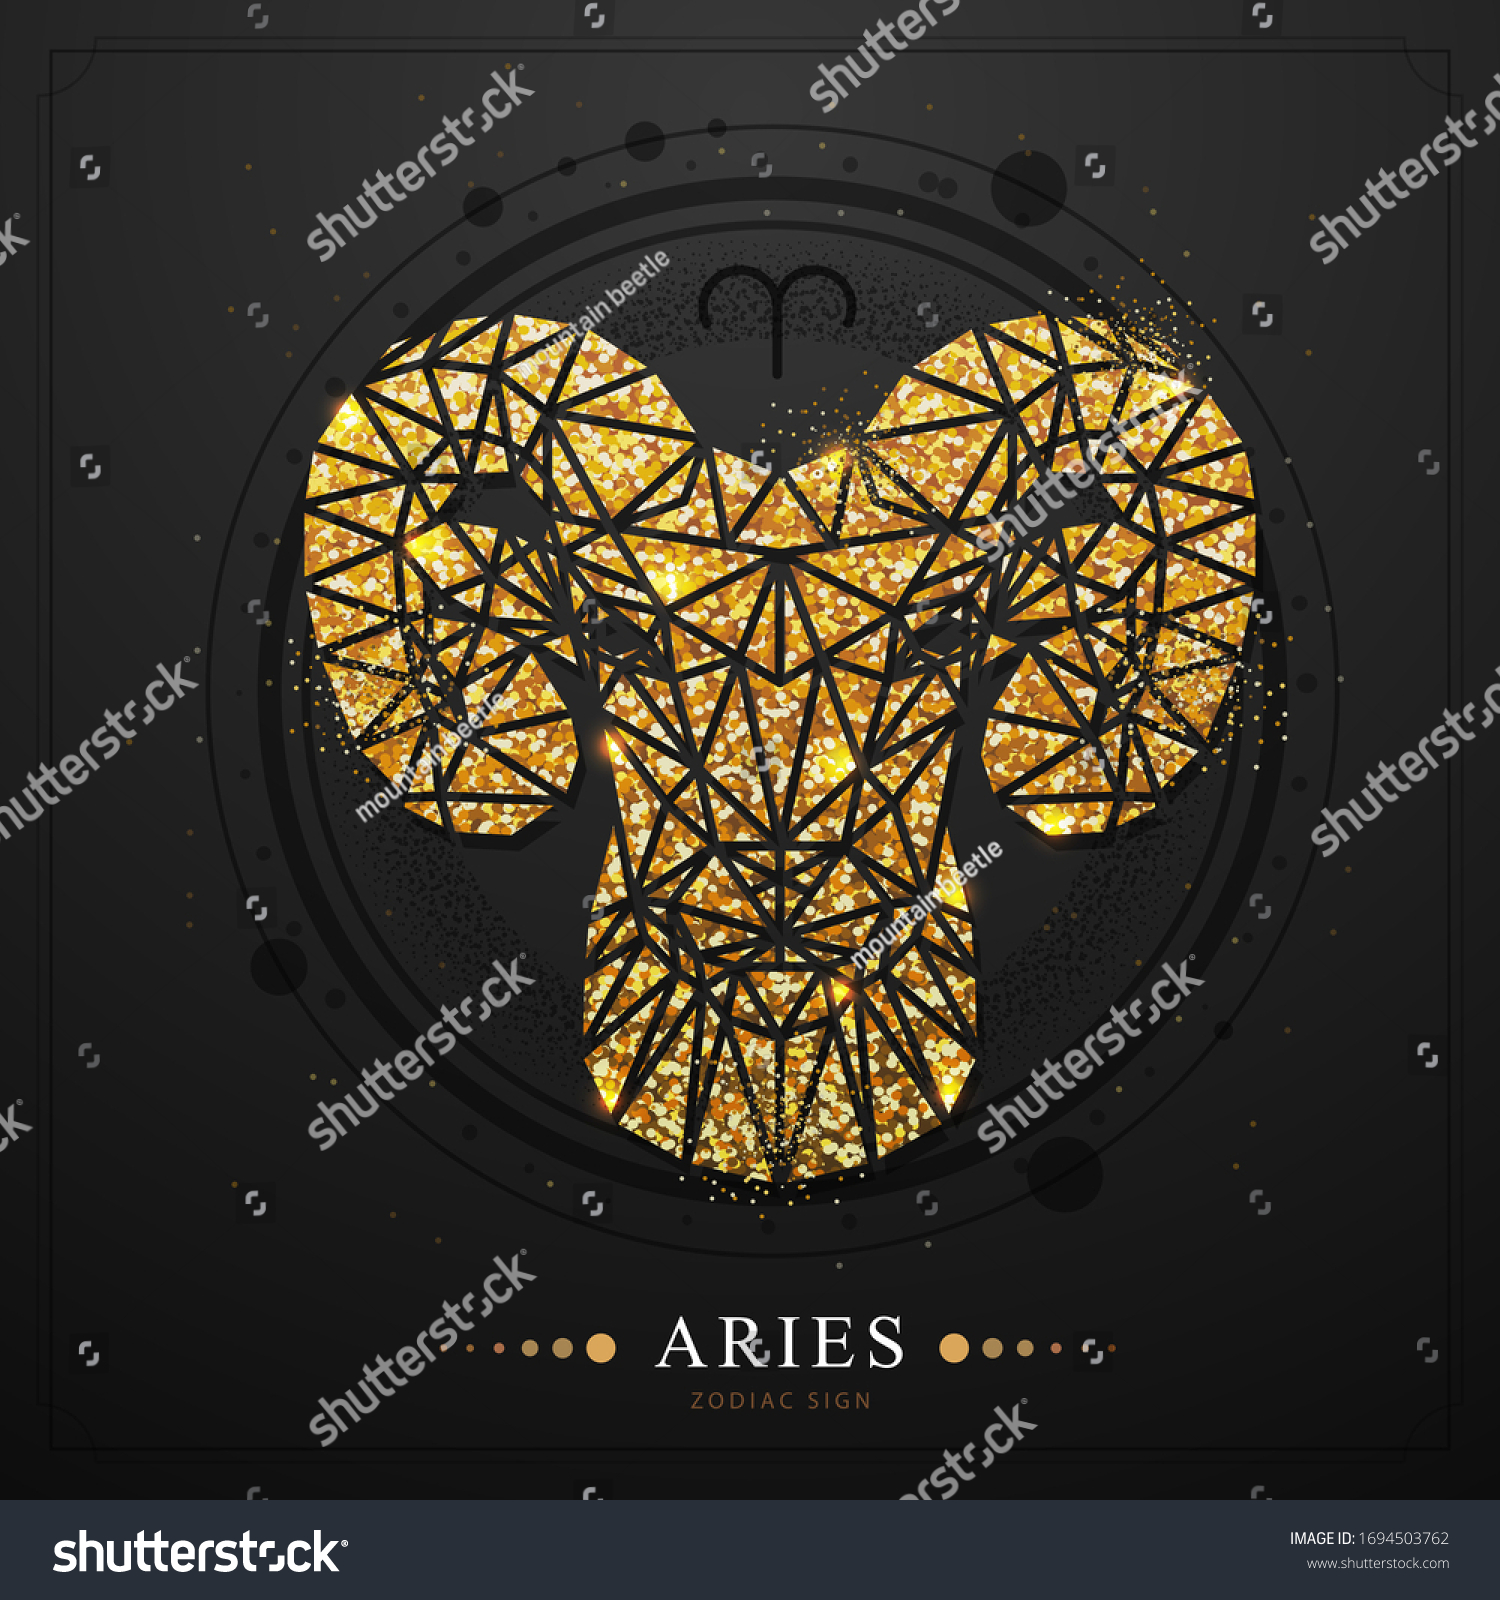 Modern Magic Witchcraft Card Golden Astrology Stock Vector (Royalty ...